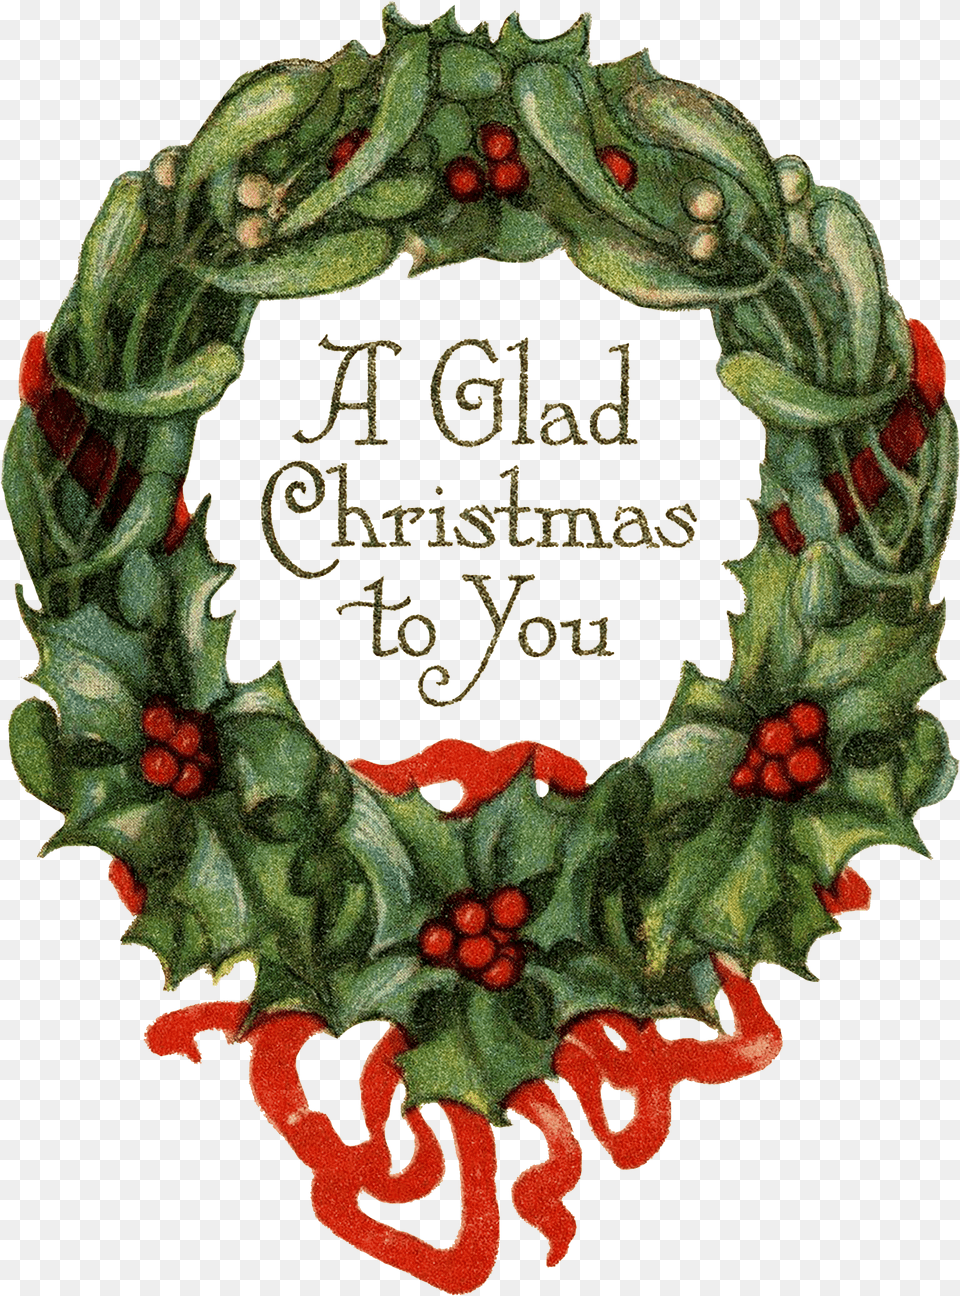 A Glad Christmas Wreath U2013 Wings Of Whimsy Christmas Wreath Vintage Free Png Download